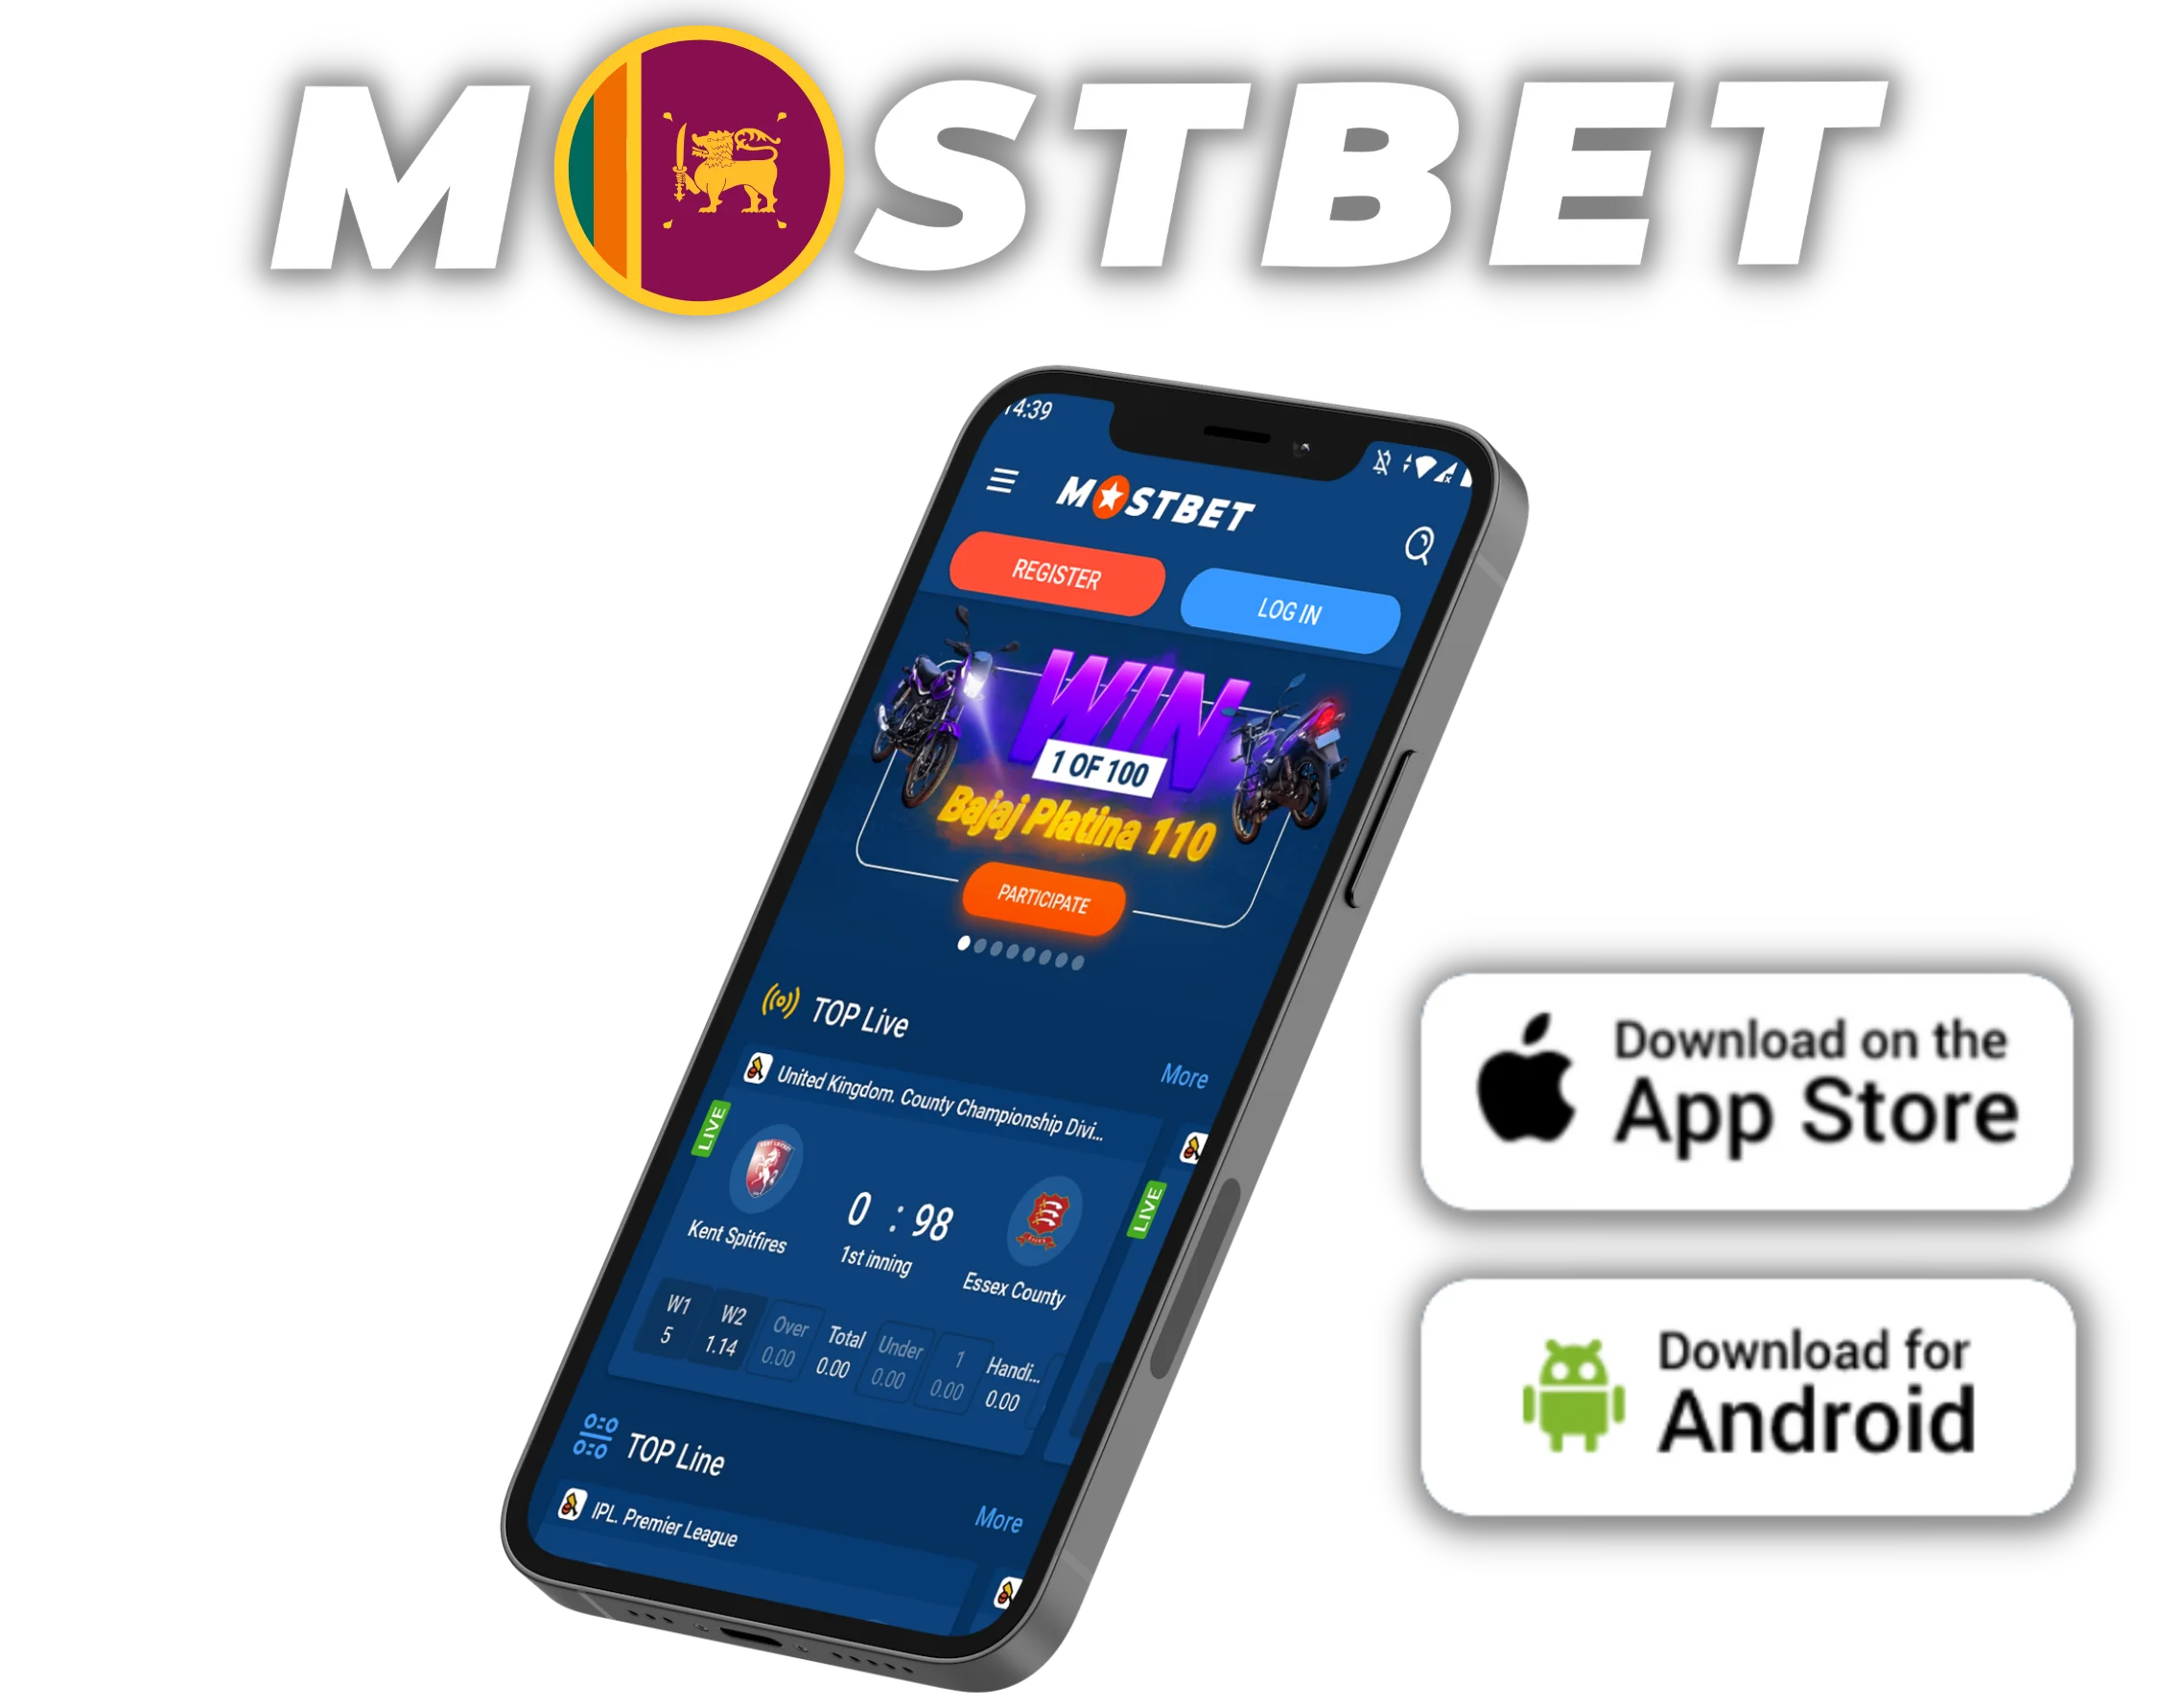 These 5 Simple Mostbet Betting Company and Casino in Tunisia Tricks Will Pump Up Your Sales Almost Instantly